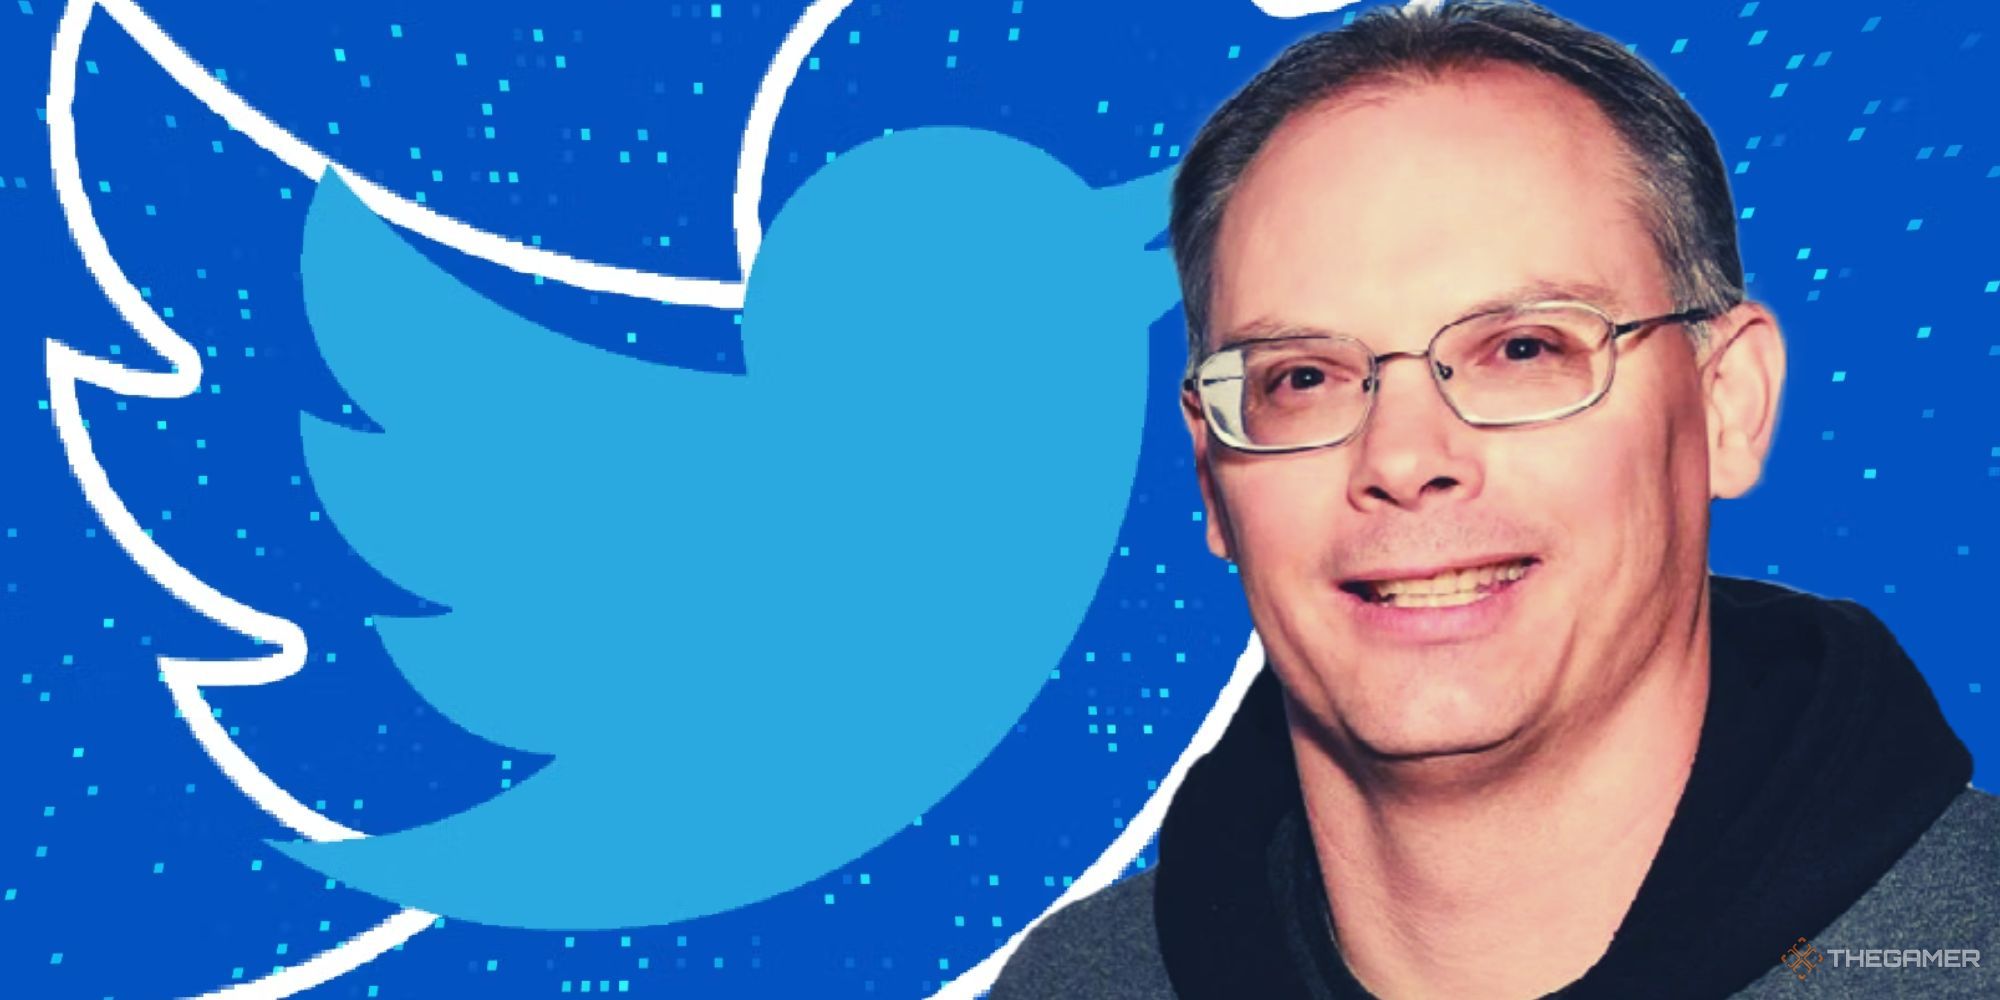 Epic Games CEO Tim Sweeney next to the Twitter logo